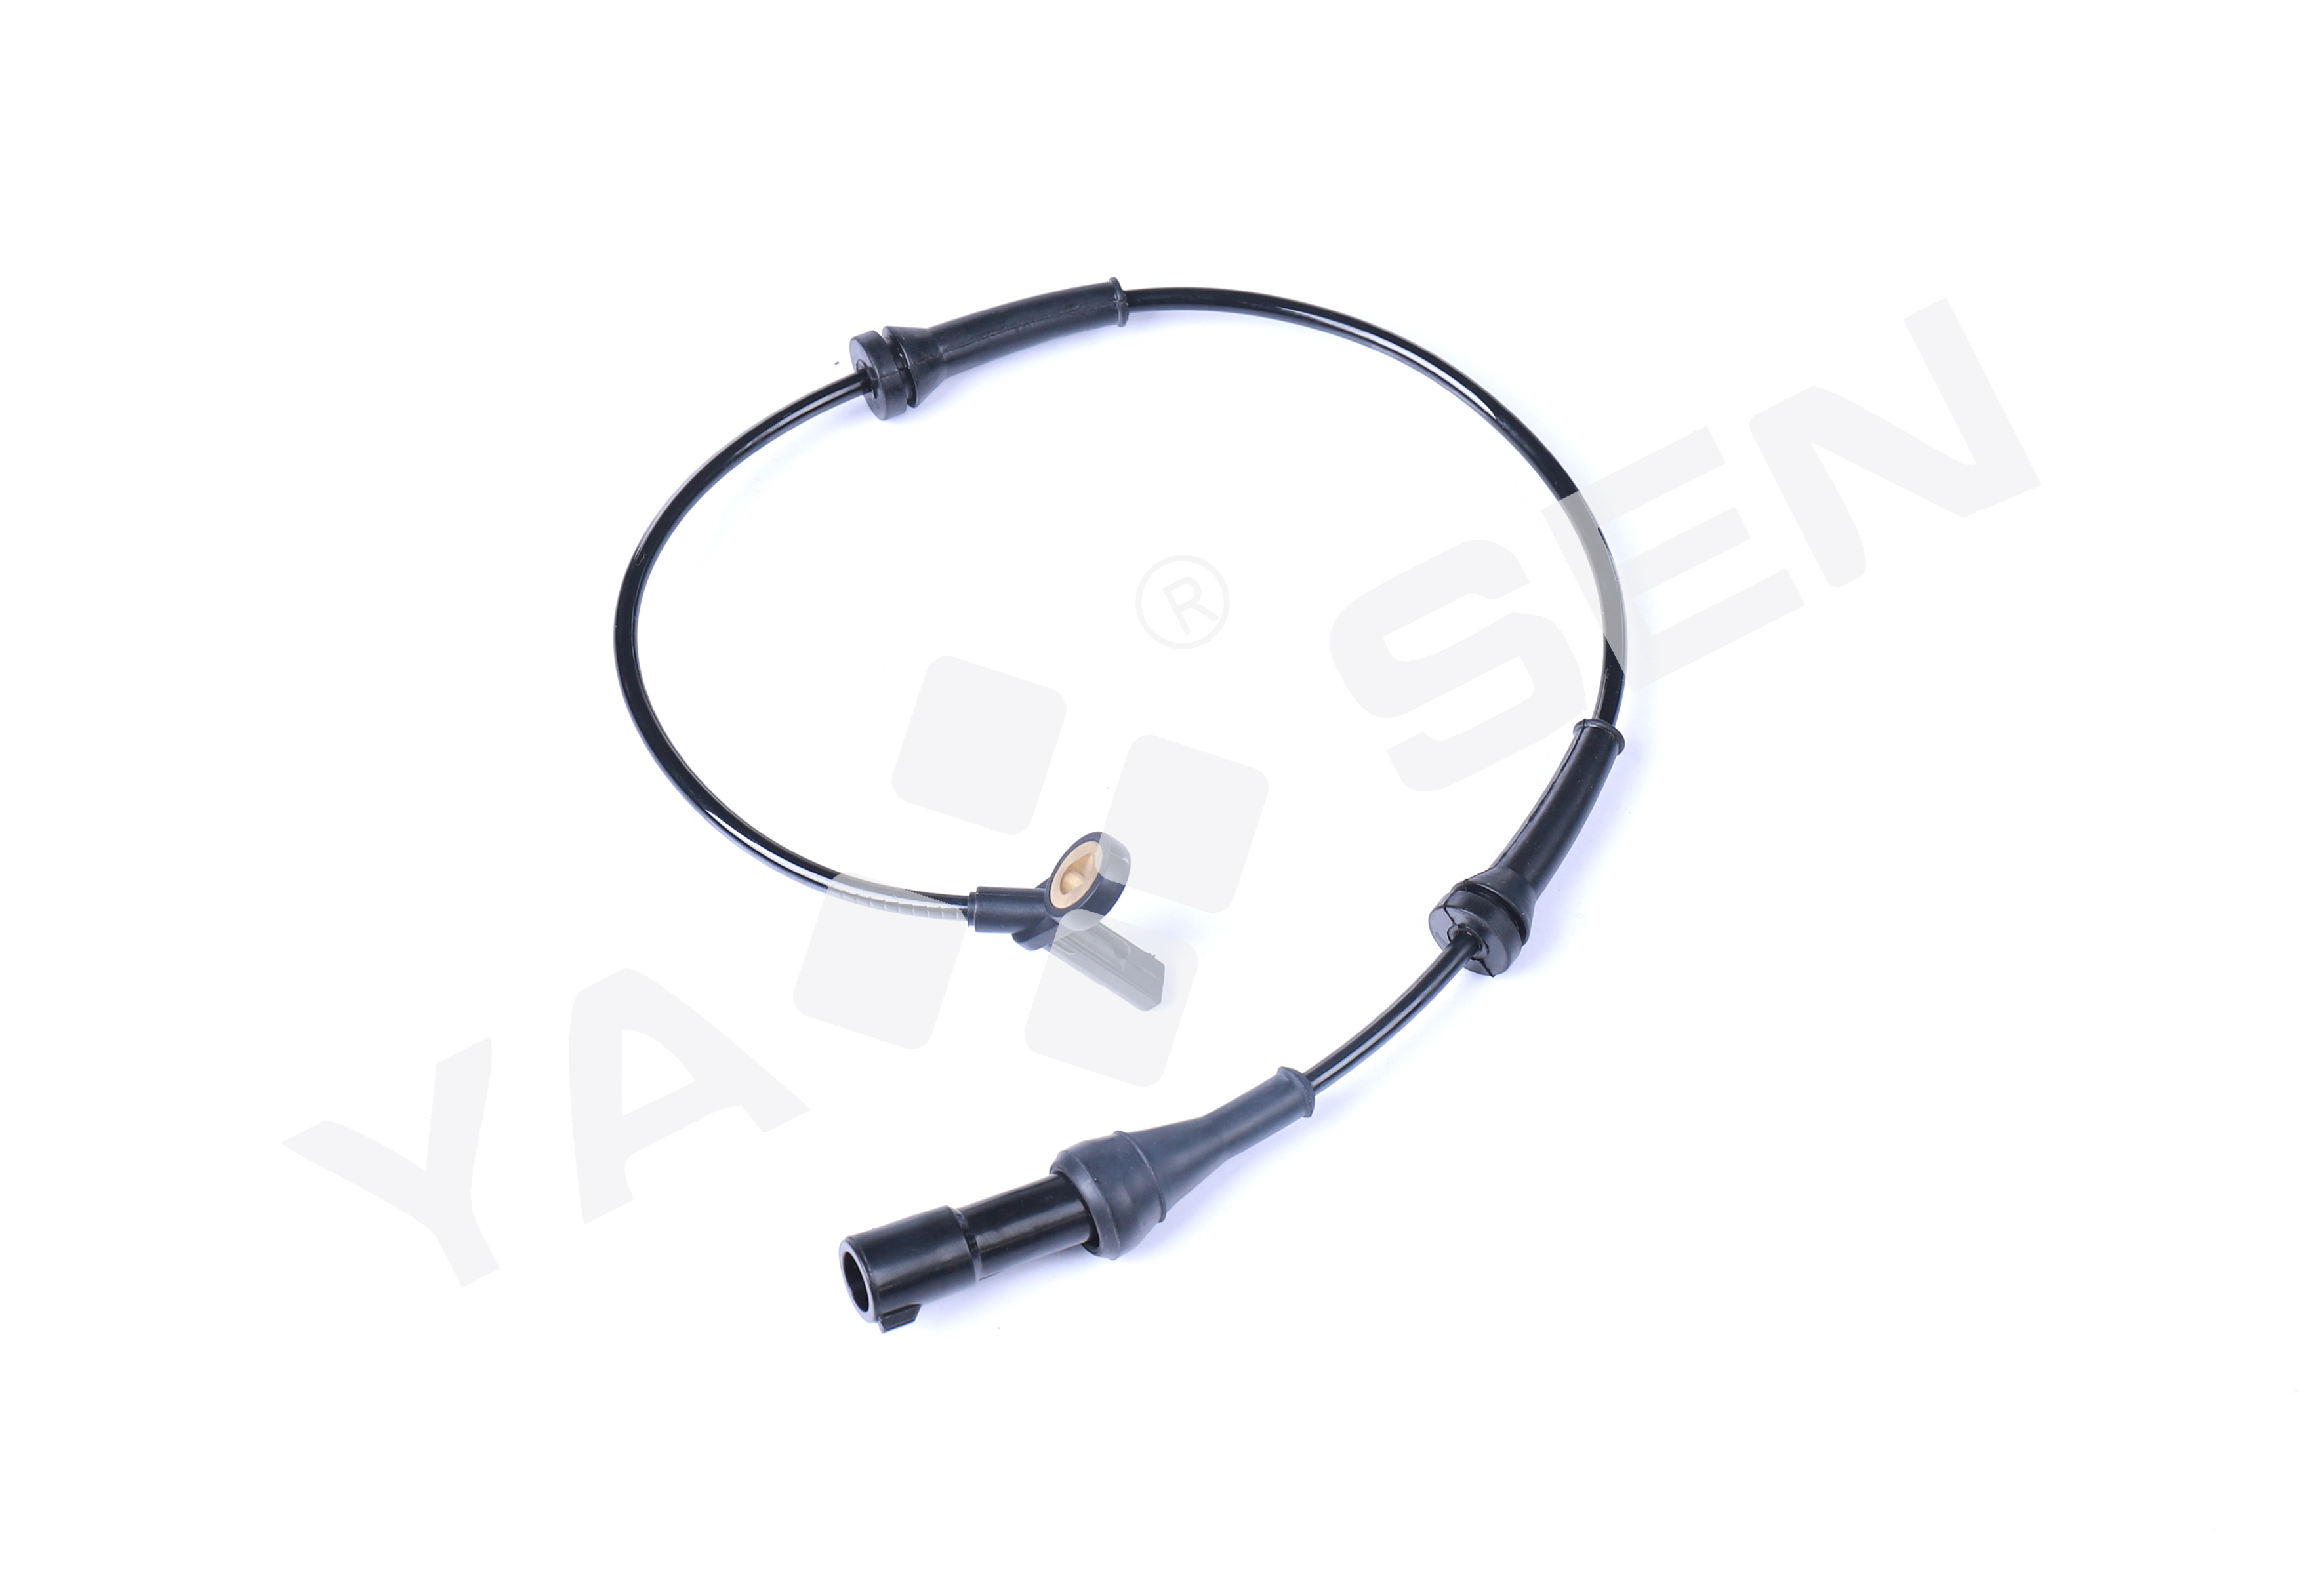 ABS Wheel Speed Sensor for FORD,  8S4Z2C204A 72-10912 ABS1856 BRAB229 695-153 ALS1763 SU13721 5S12303 1802-484106 BRAB-229 412.7